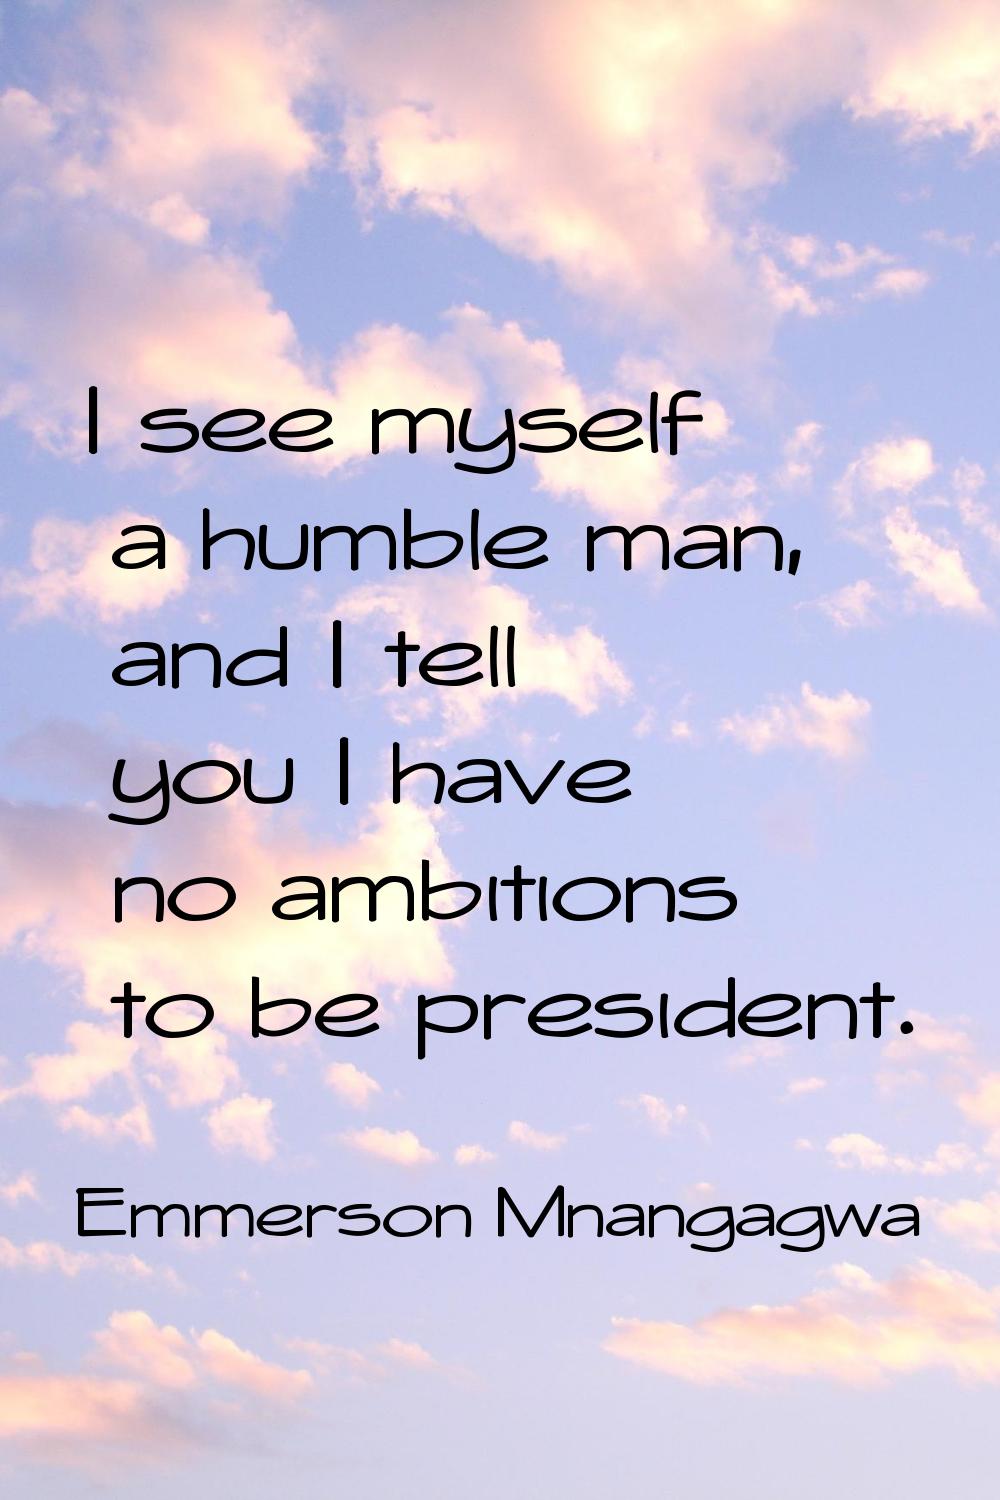 I see myself a humble man, and I tell you I have no ambitions to be president.